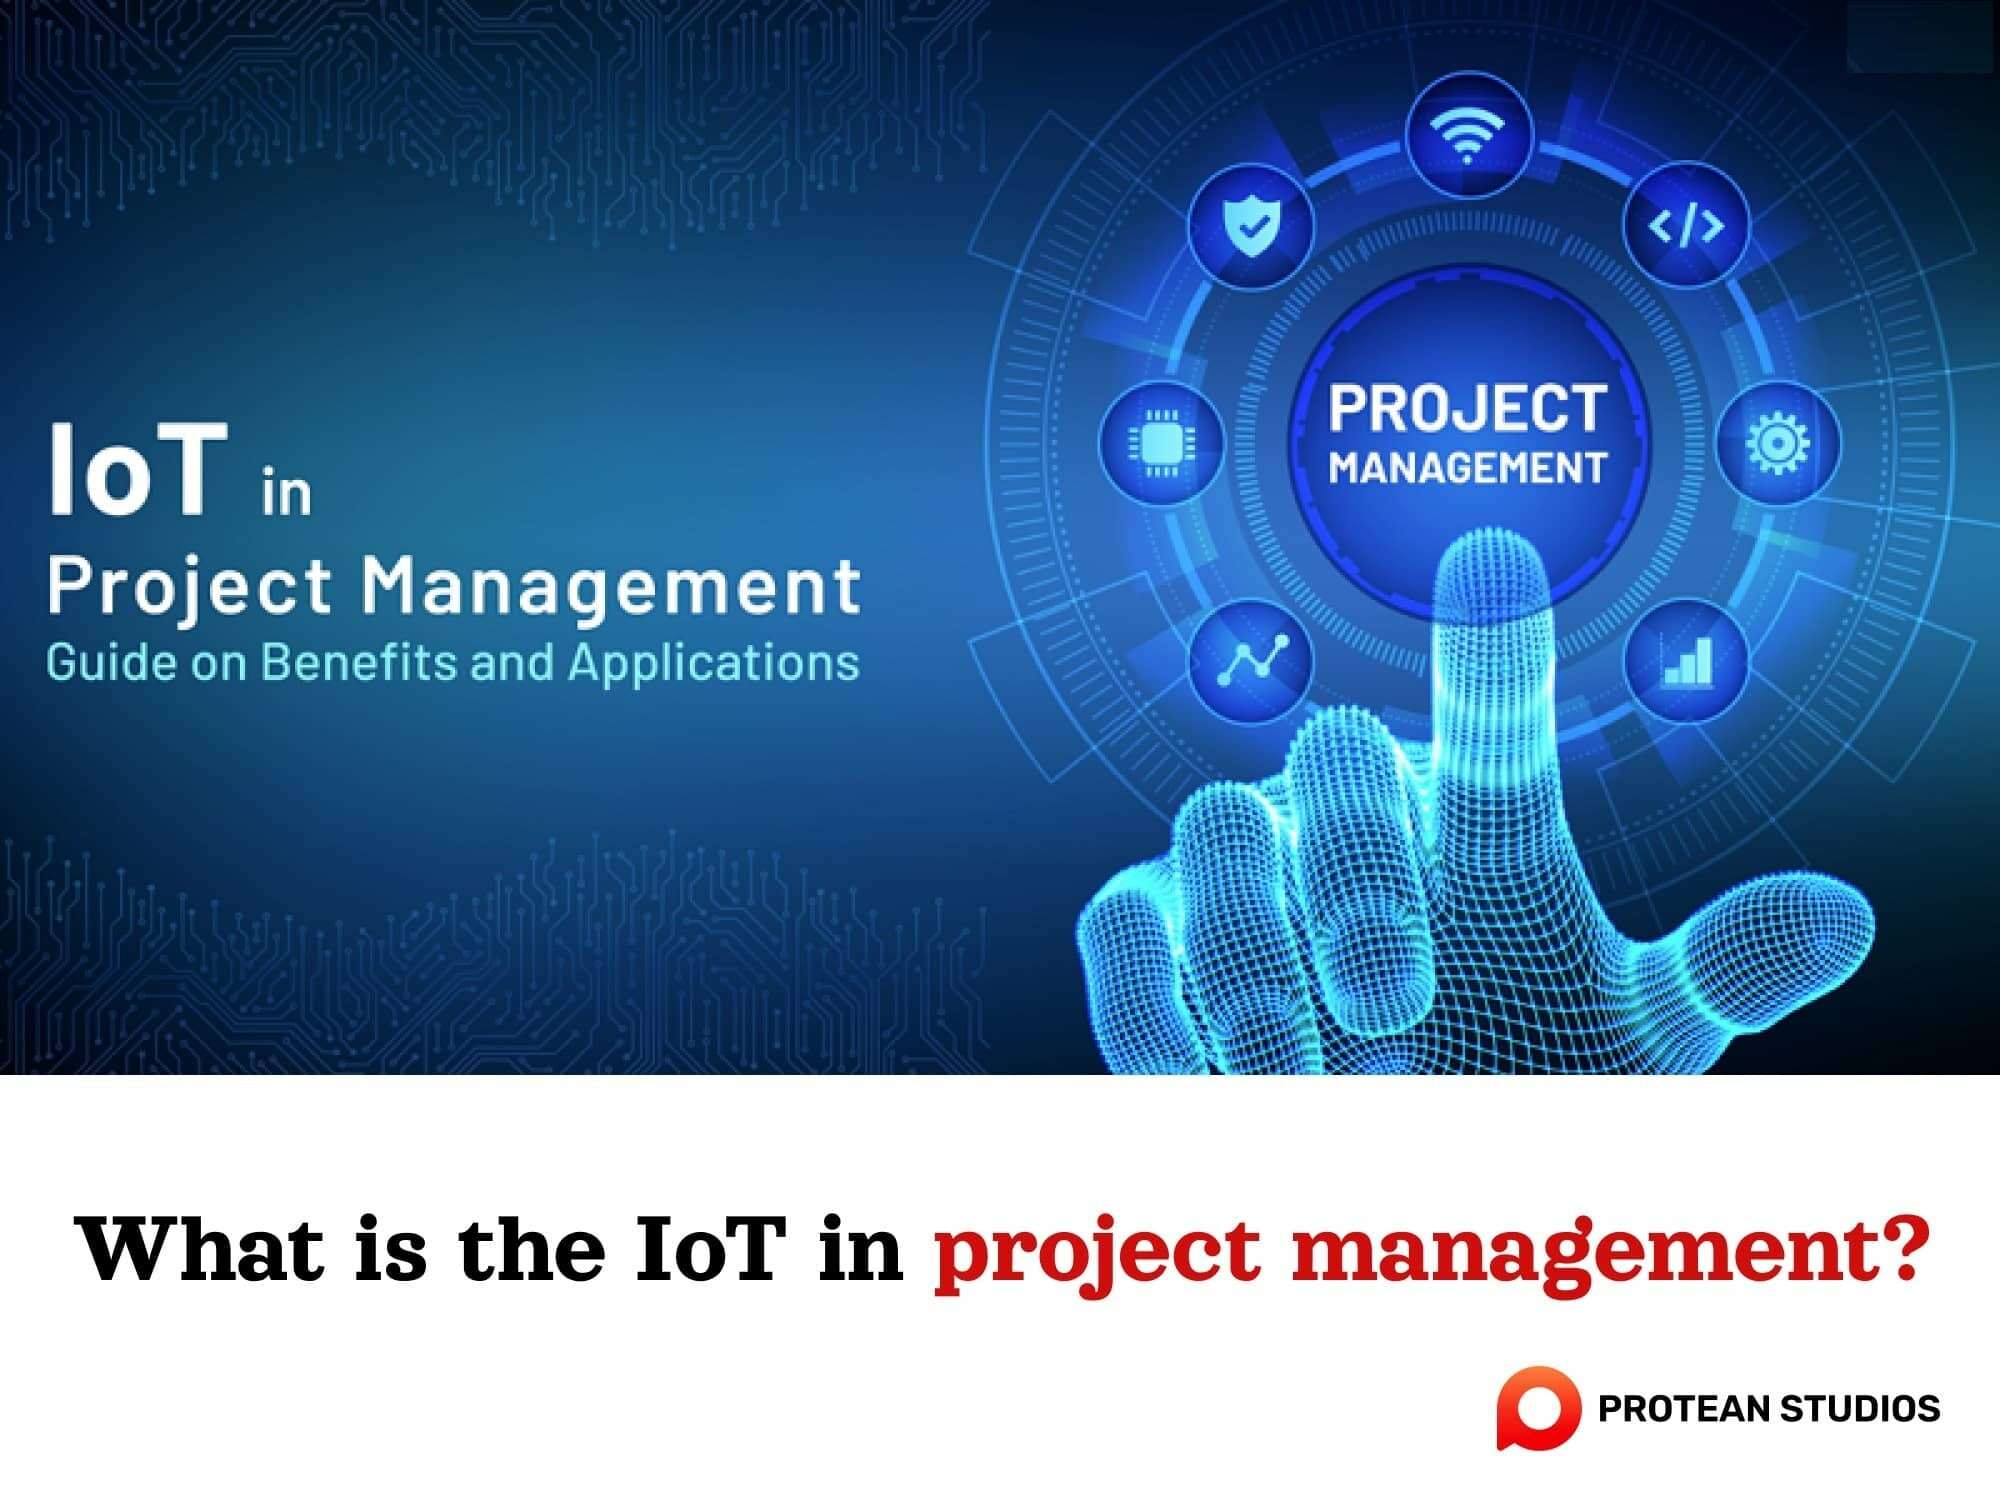 Definition of the IoT in project management